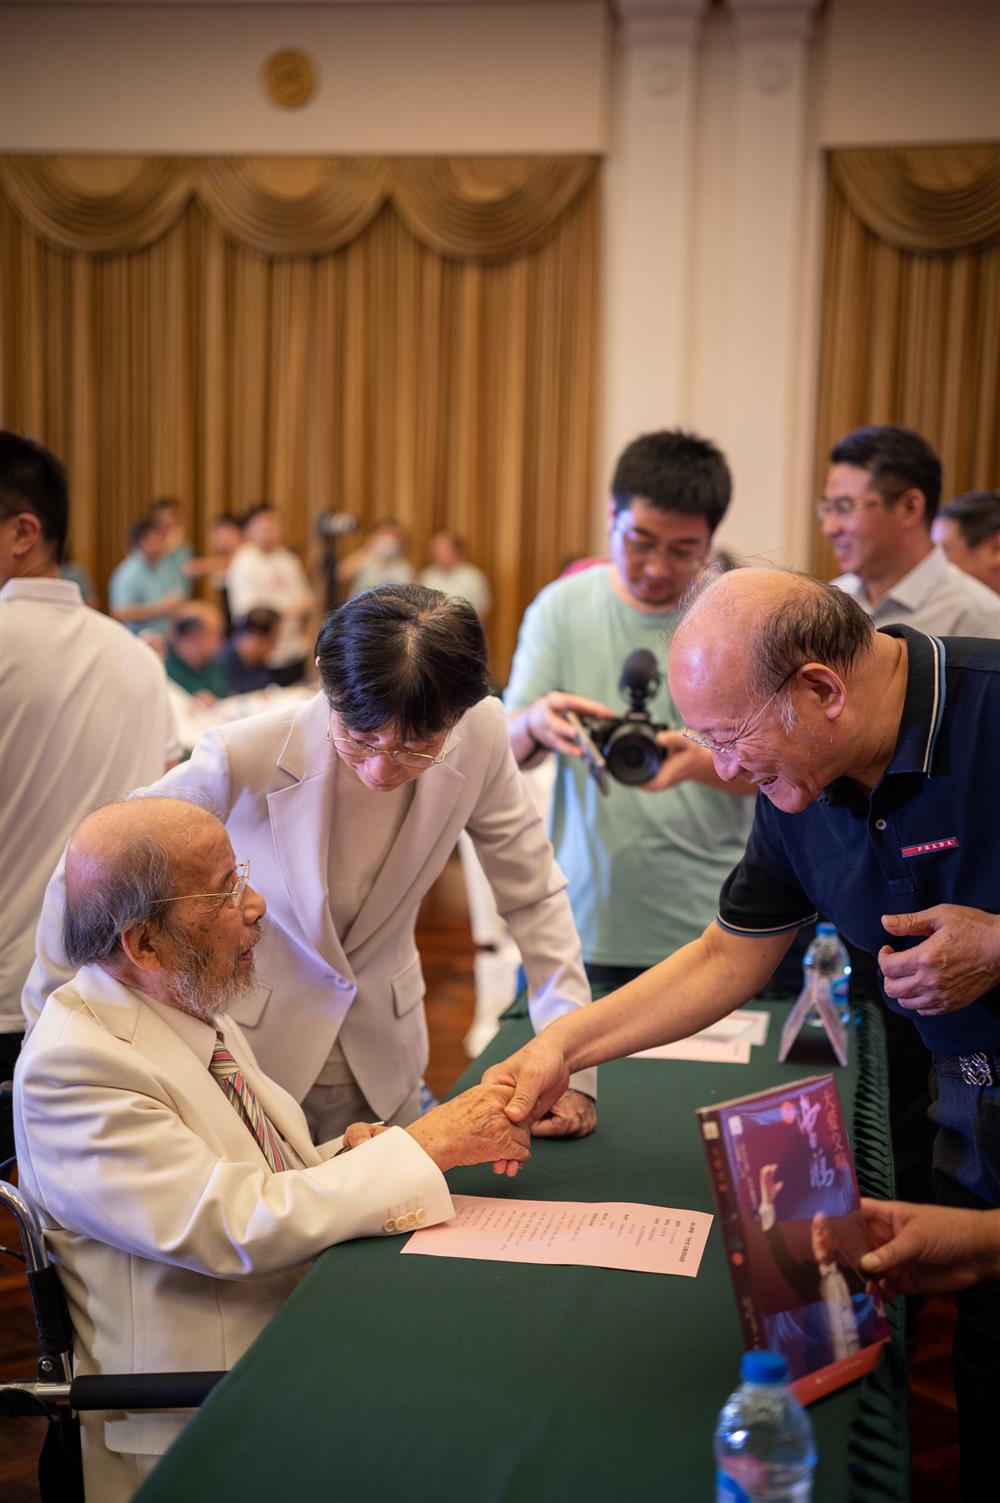 98 year old conductor Cao Peng signs for readers in a wheelchair, planning for the Shanghai Book Fair on-site | Shen Guang | Book Fair